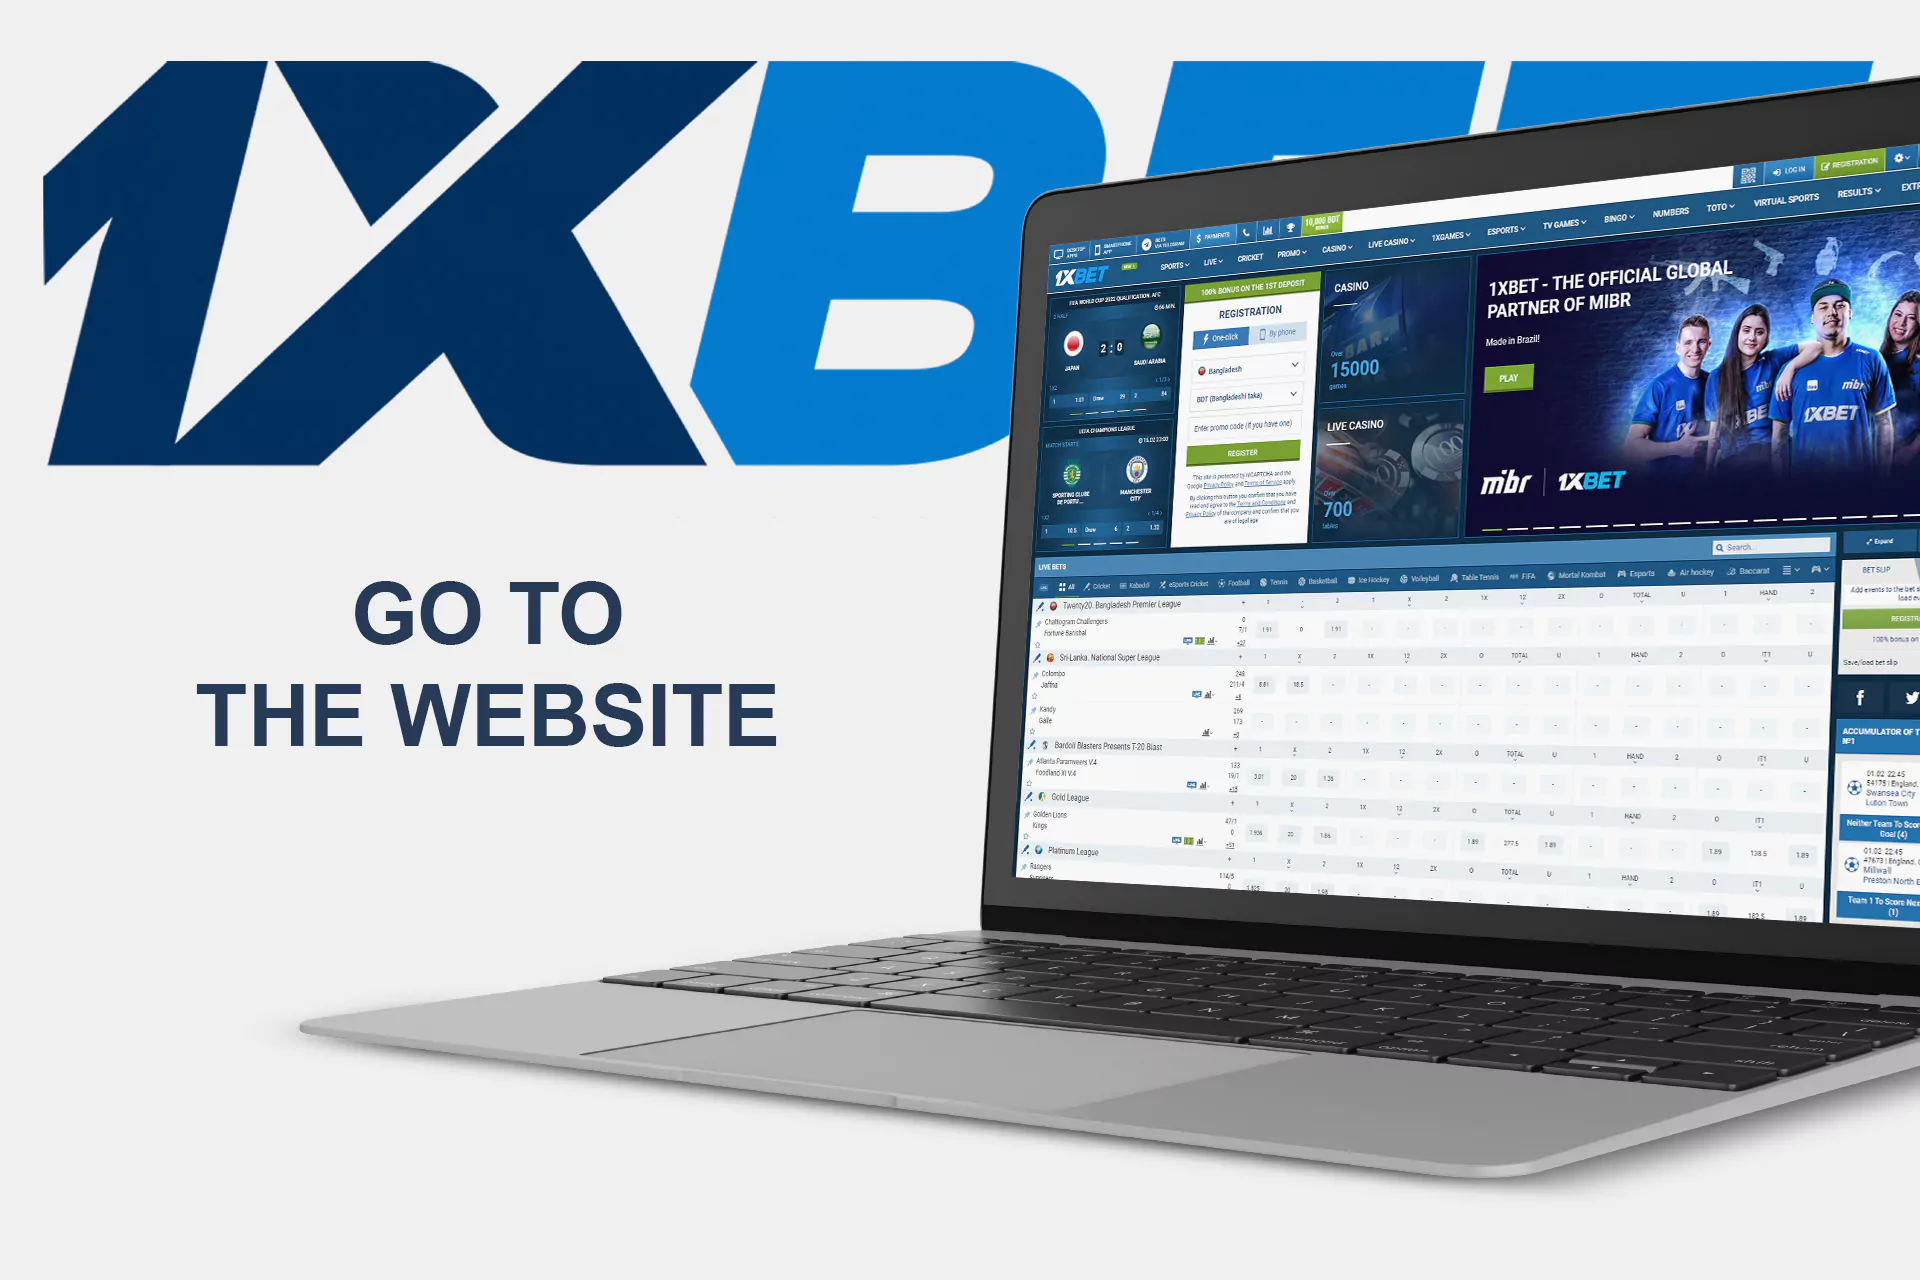 Go to the official website of 1xBet in a browser on your device.